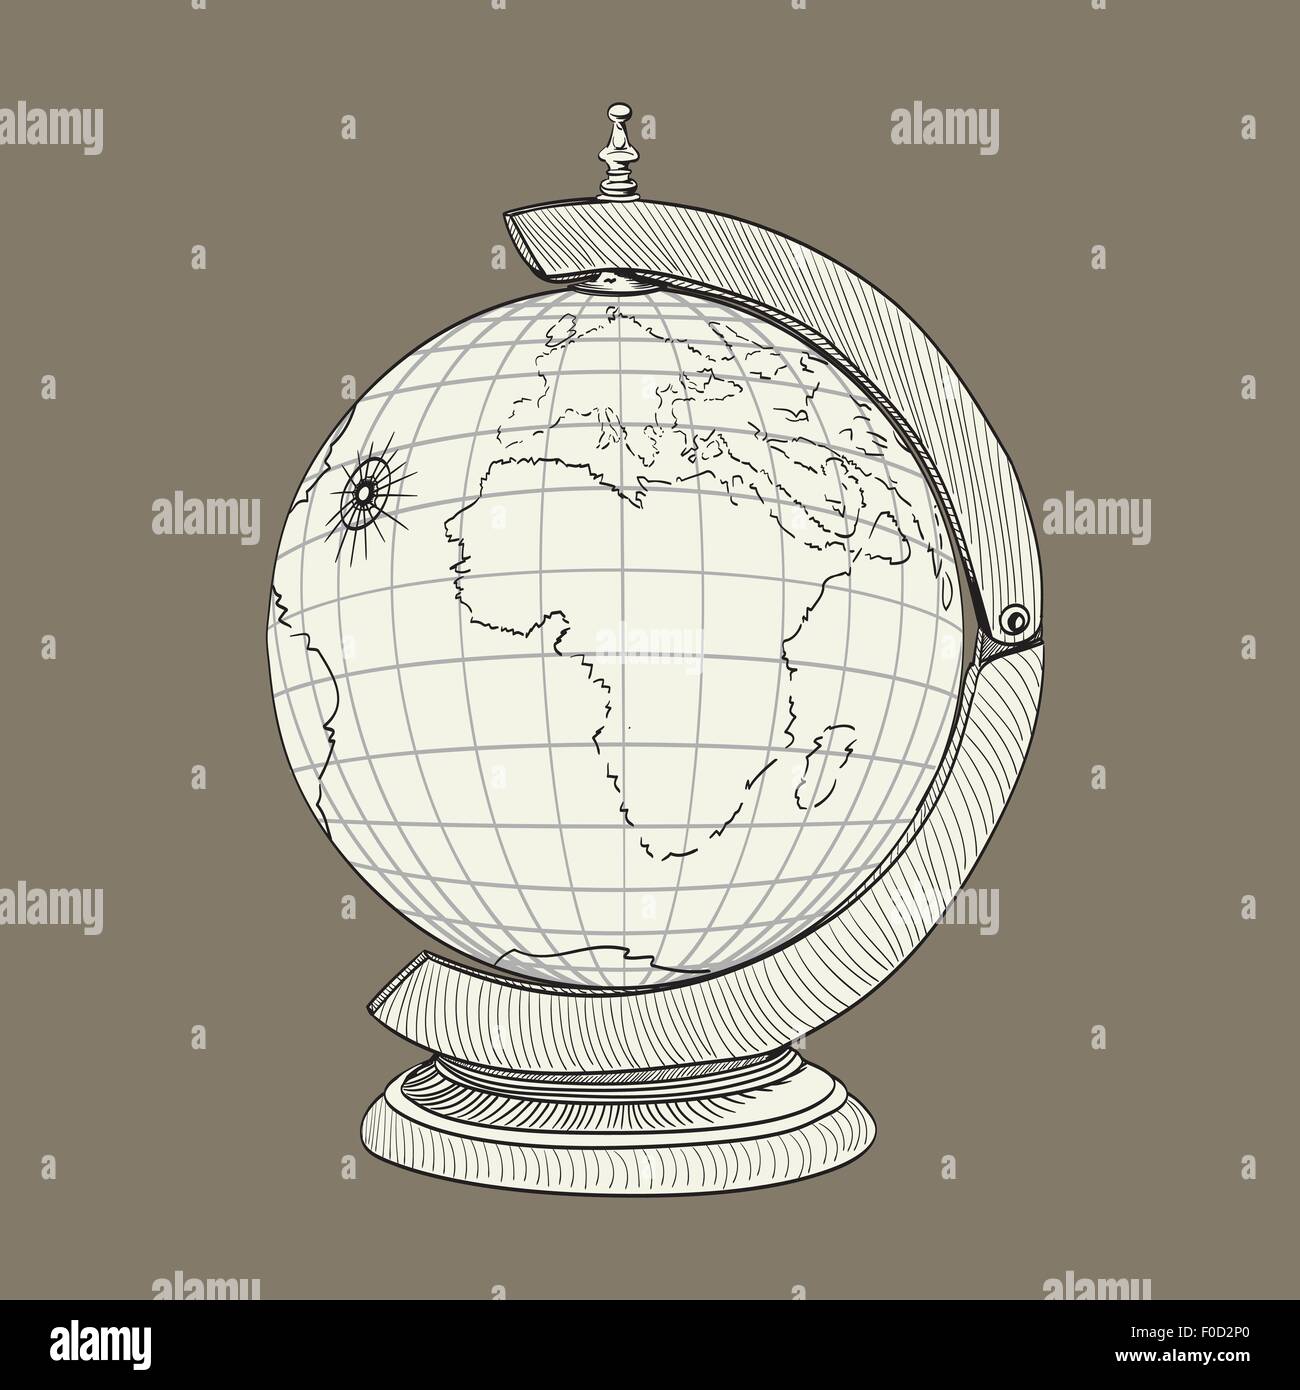 ancient geographical globe illustration Stock Vector